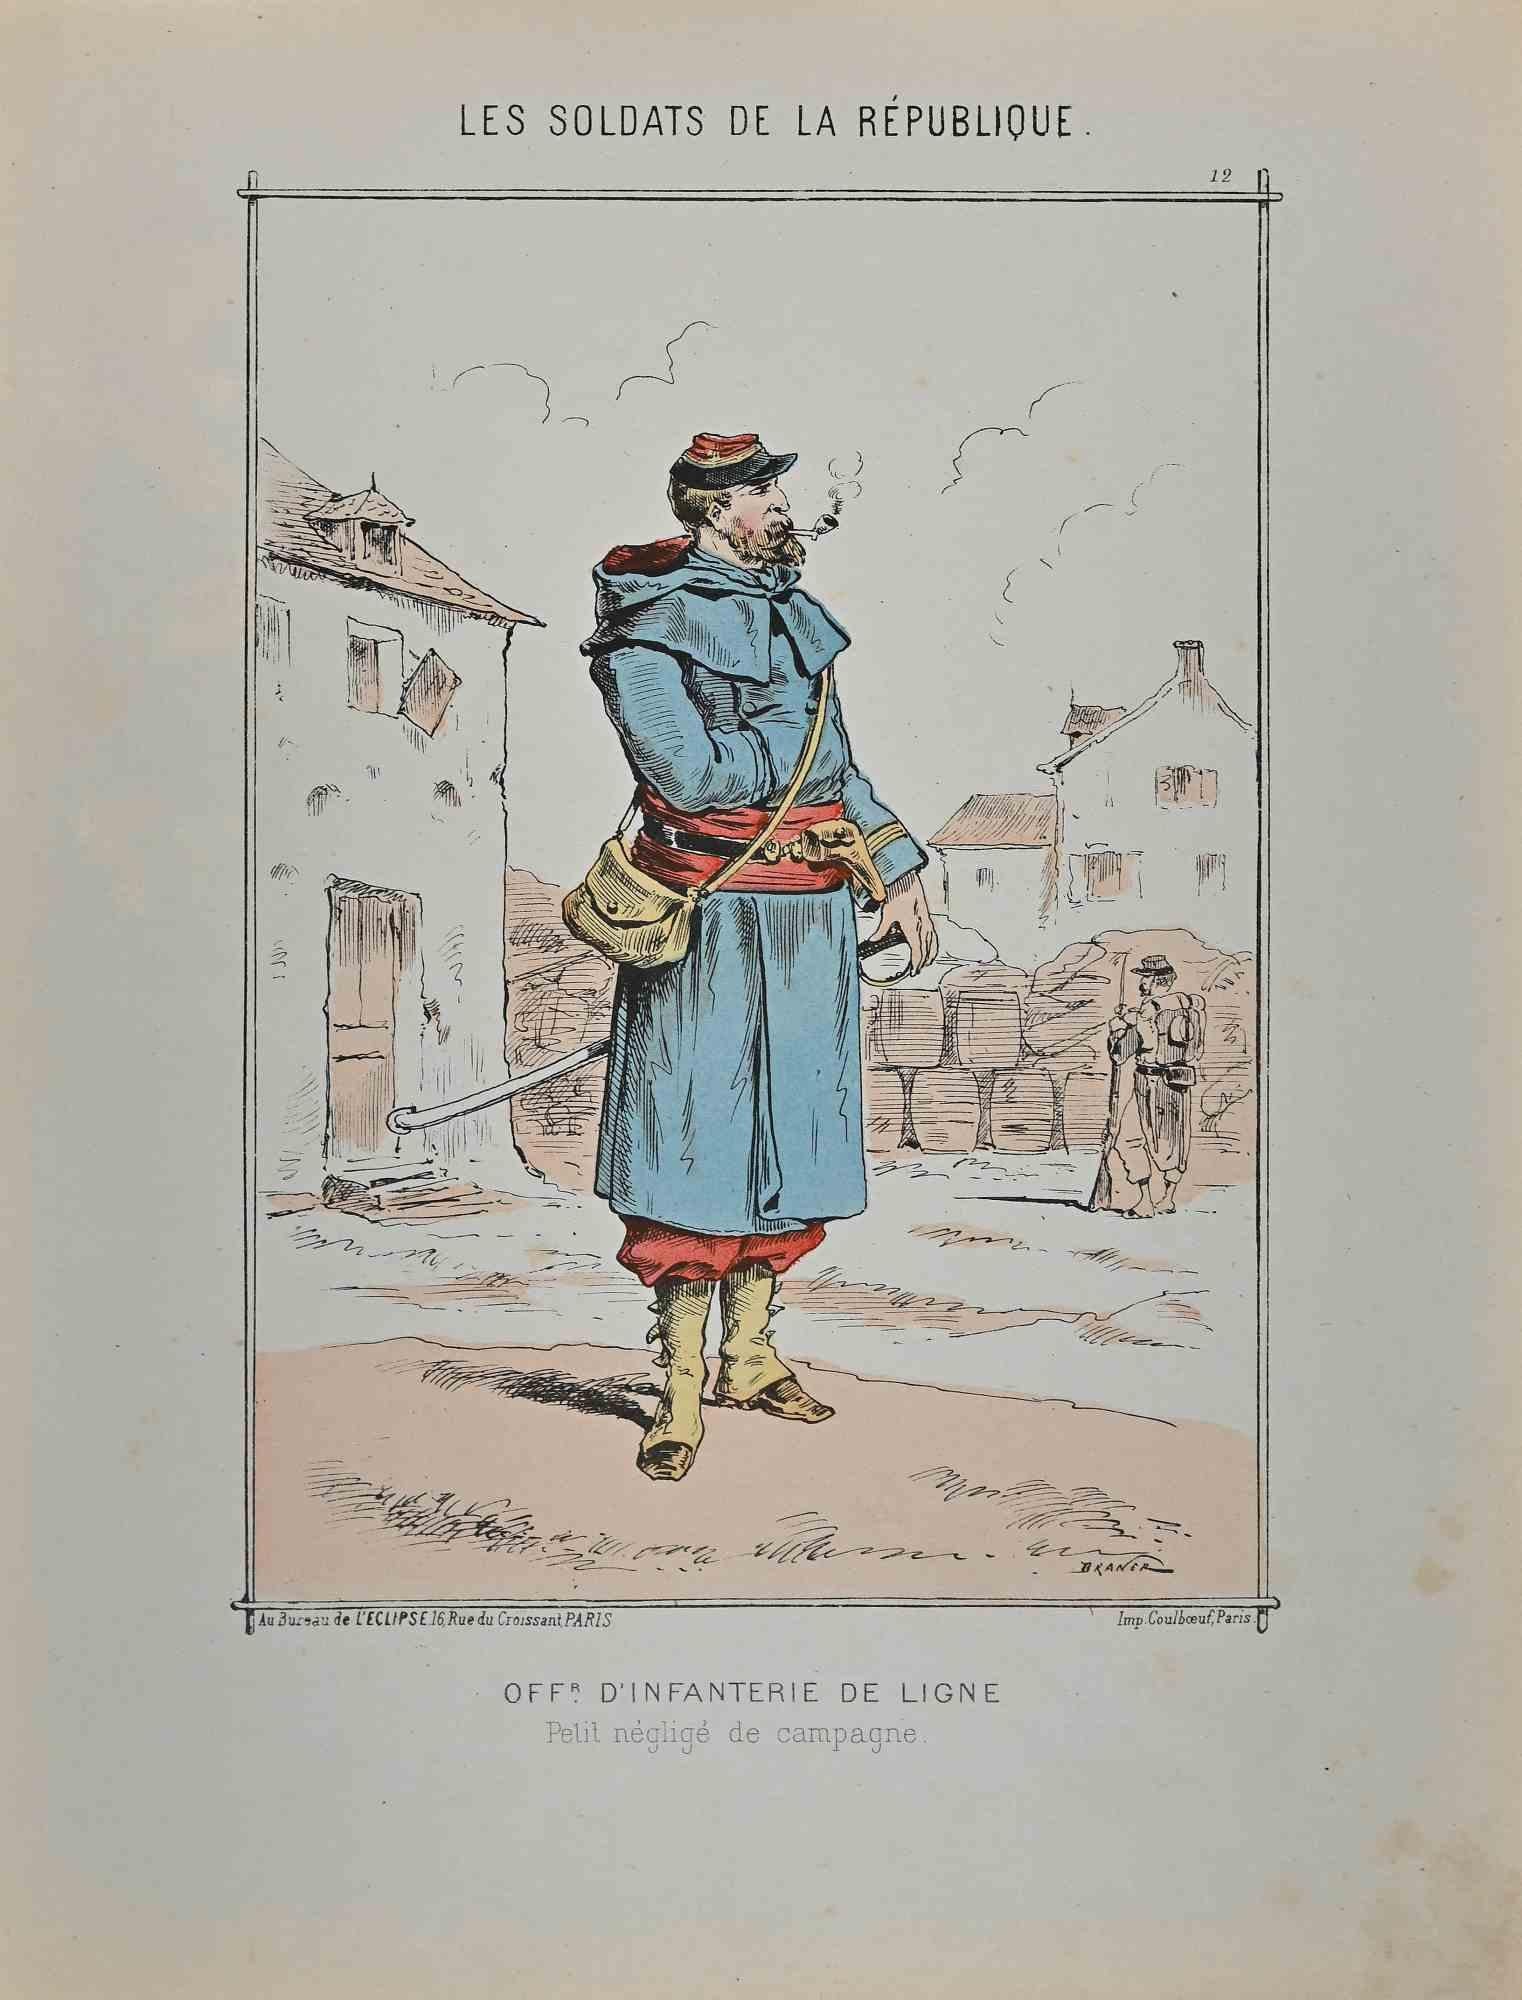 Line Infantry - Original Lithograph By Jules Renard - 19th Century